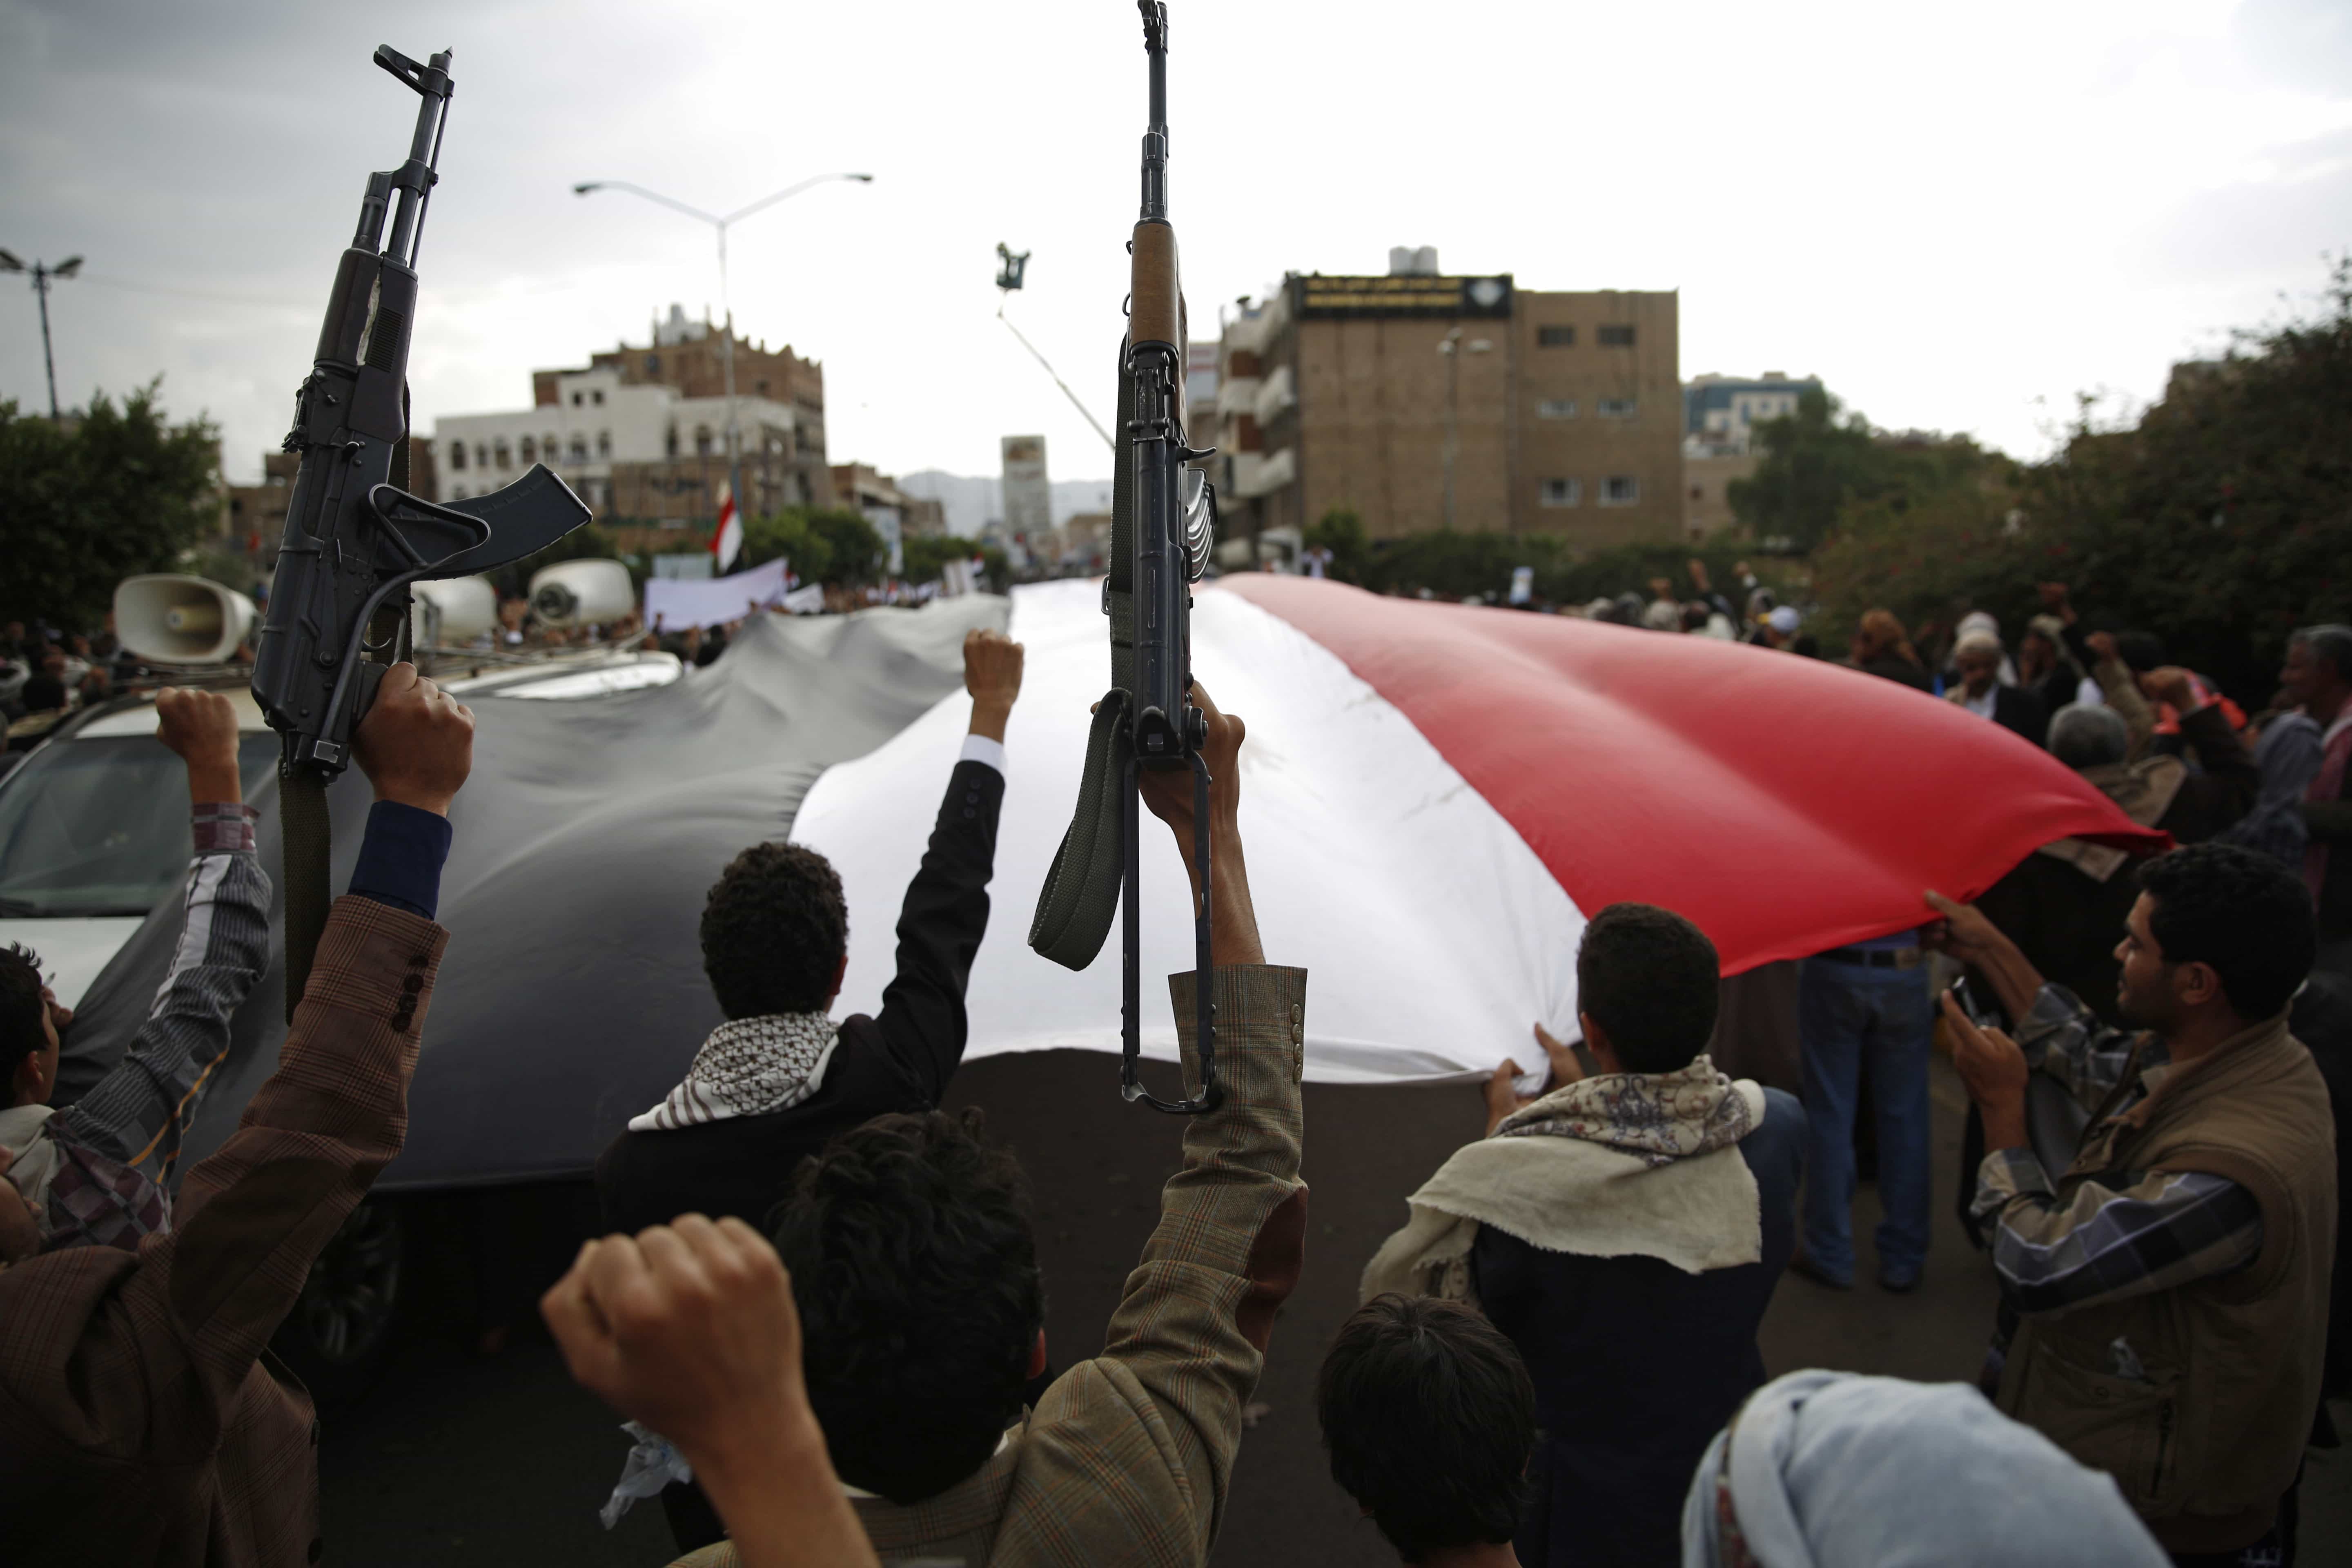 Shiite rebels known as Houthis hold up their weapons as they chant slogans during a rally to protest Saudi-led airstrikes, in Sanaa, Yemen, AP Photo/Hani Mohammed